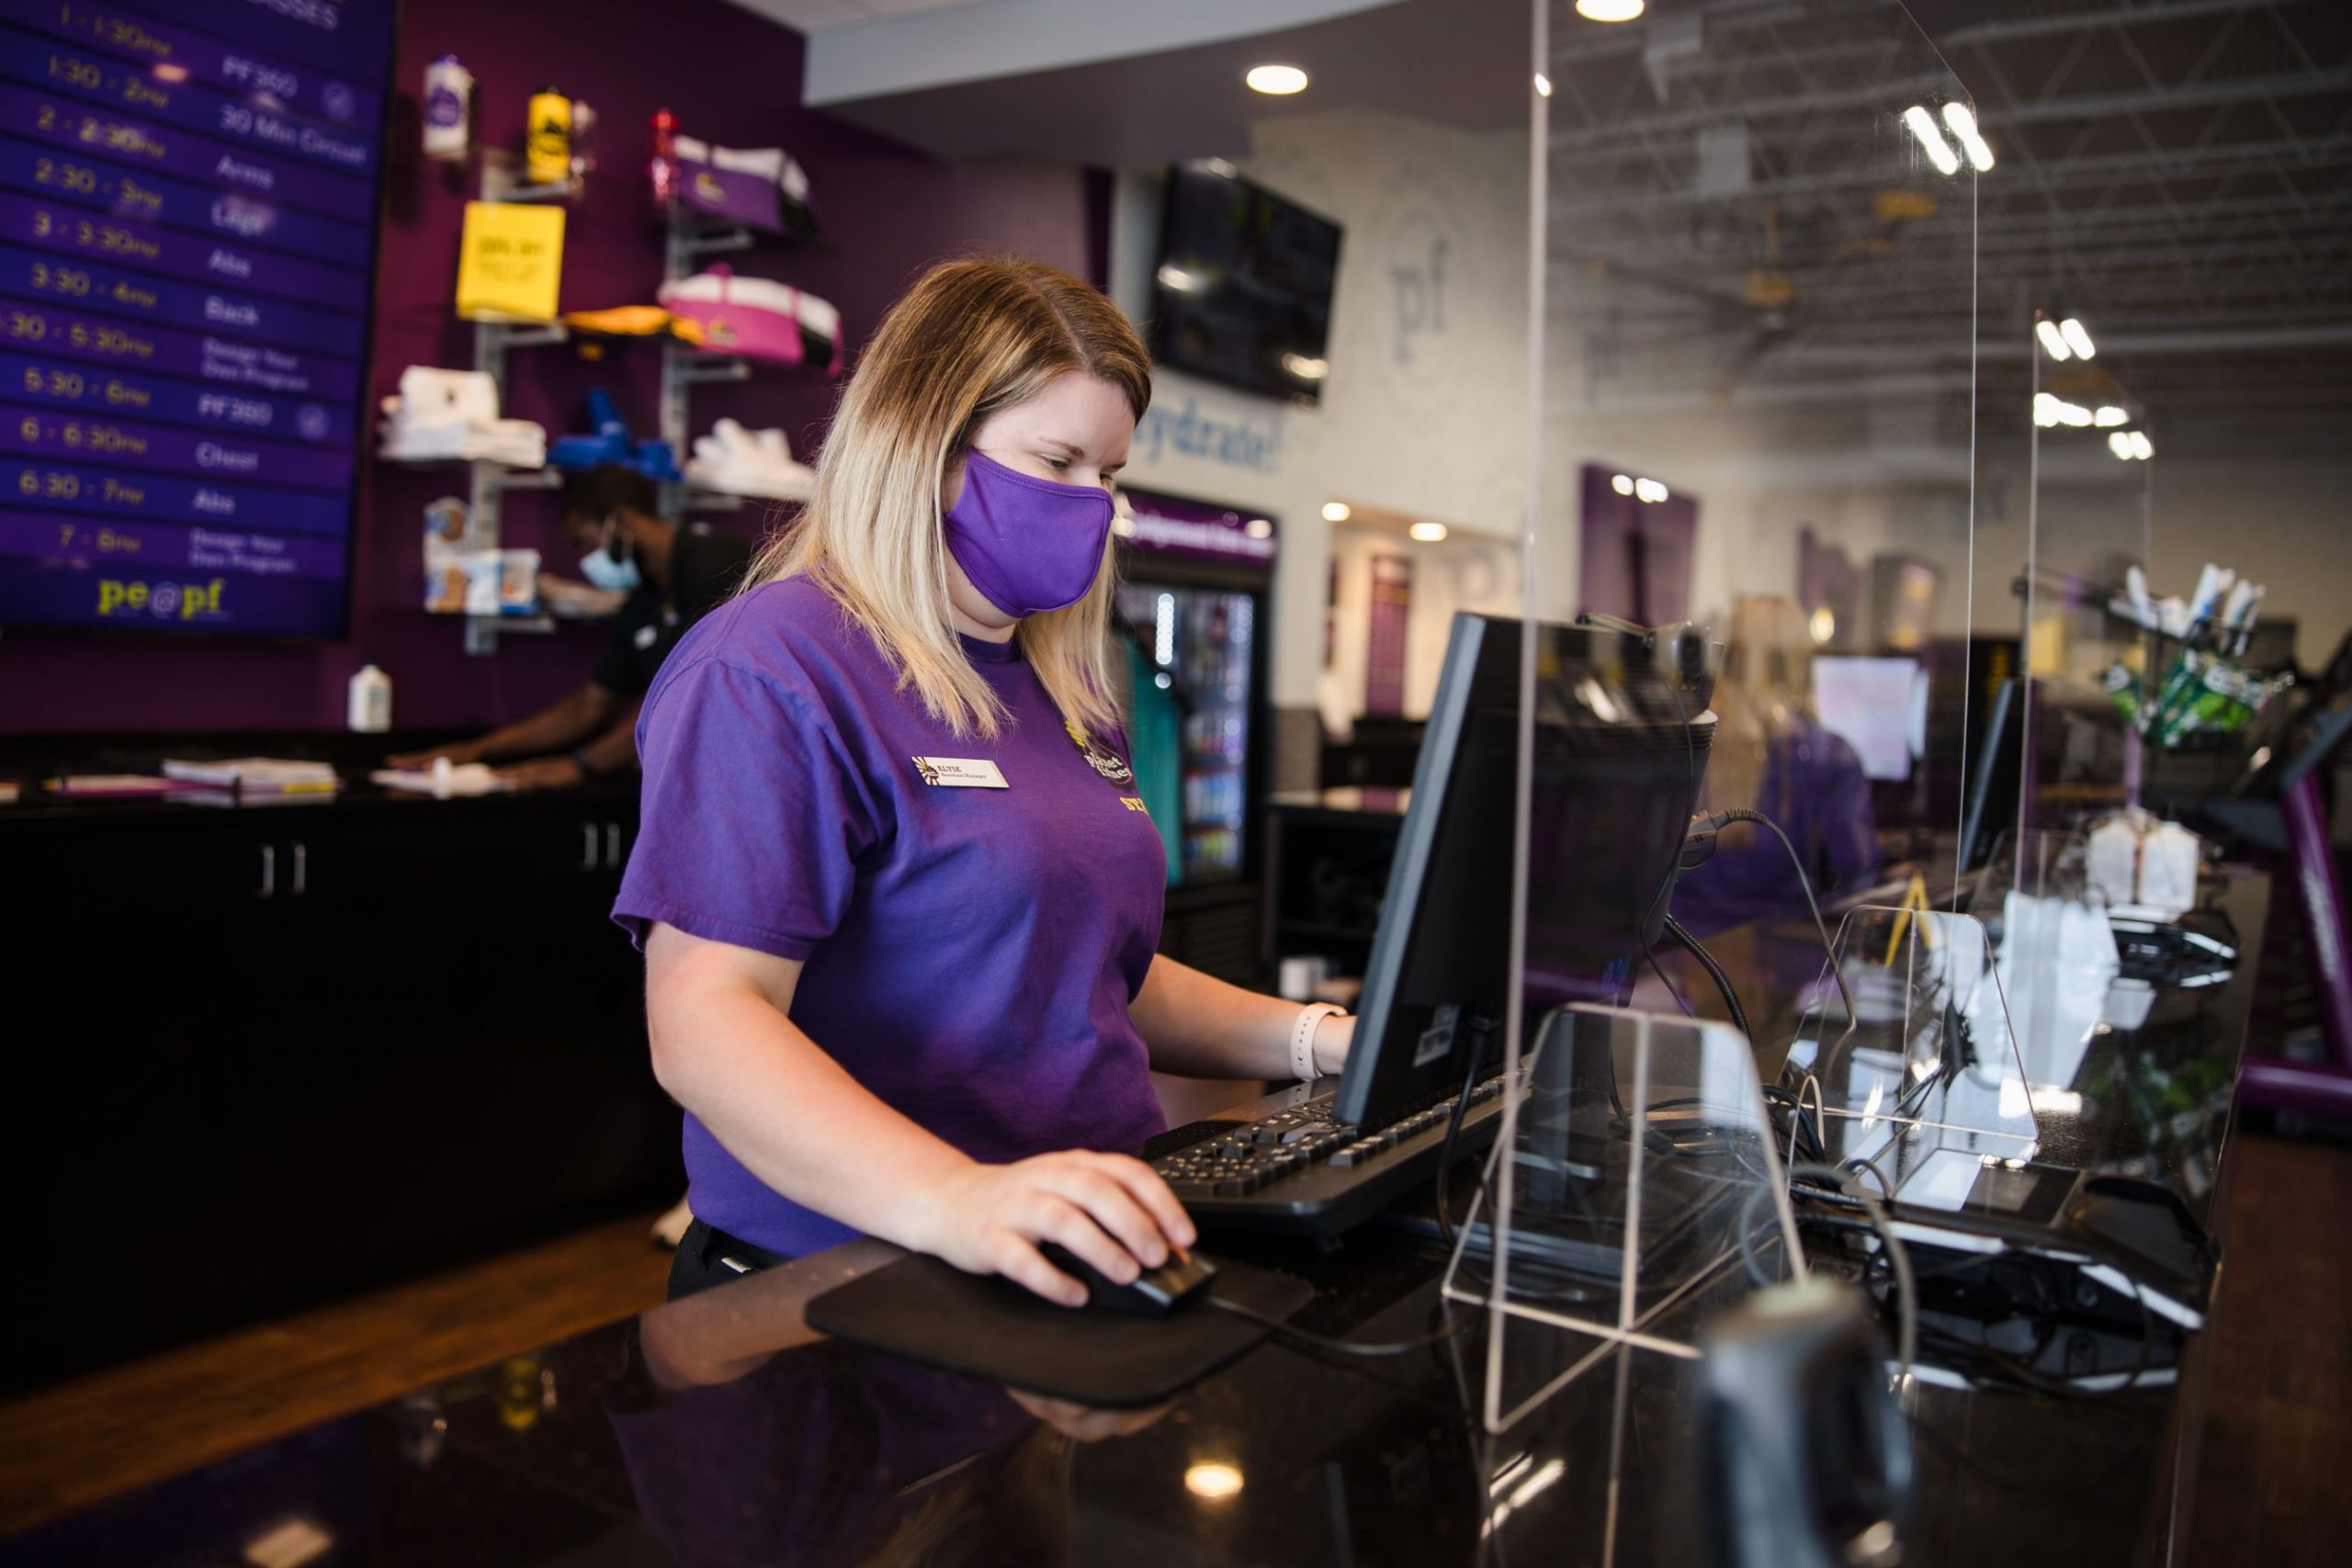 Planet Fitness puts safety first - Read V3